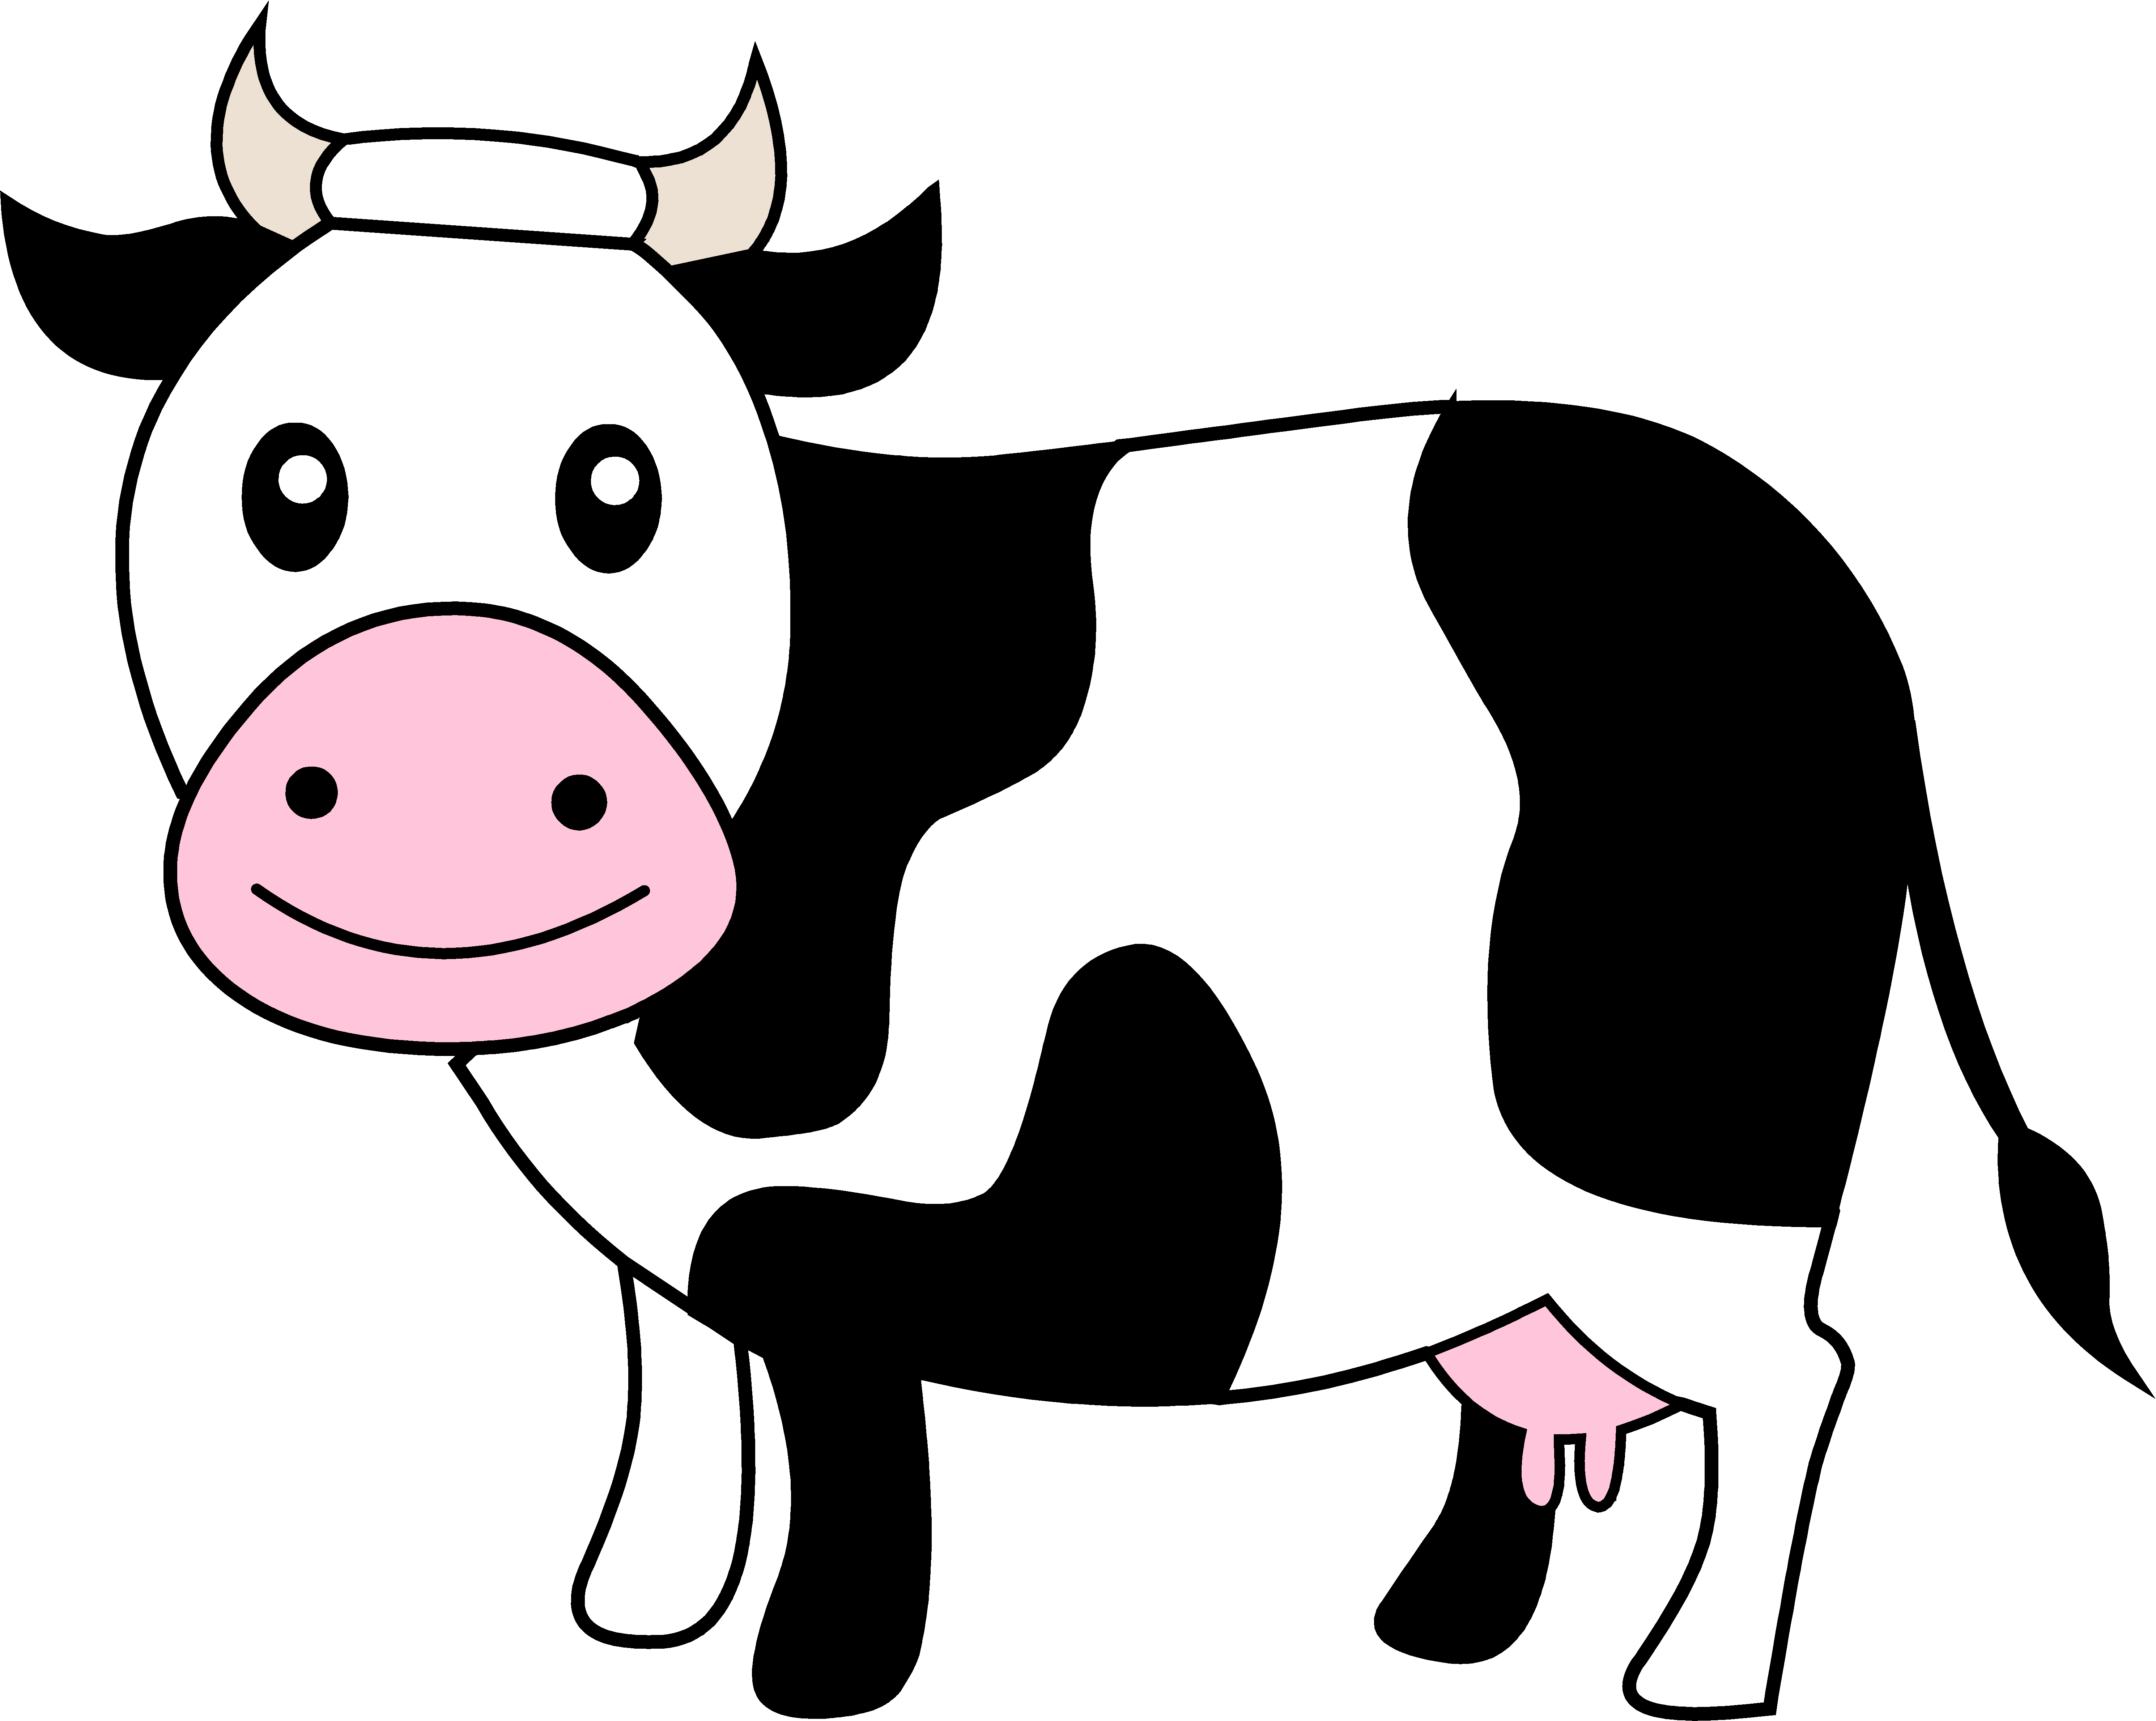 Cow Cartoon Images Free Download Clipart